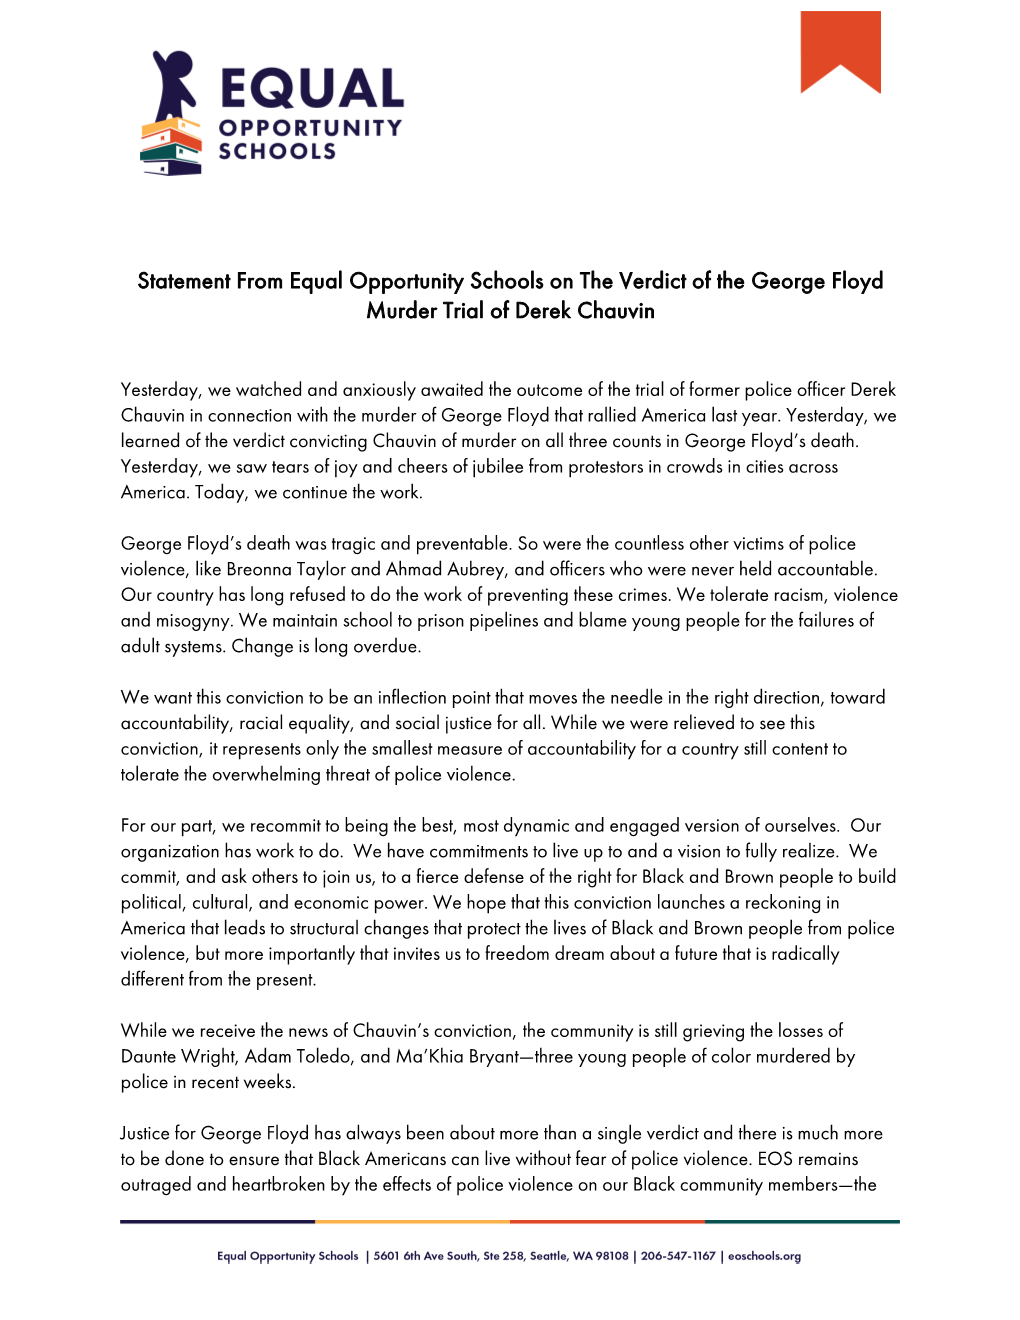 Statement from Equal Opportunity Schools on the Verdict of the George Floyd Murder Trial of Derek Chauvin